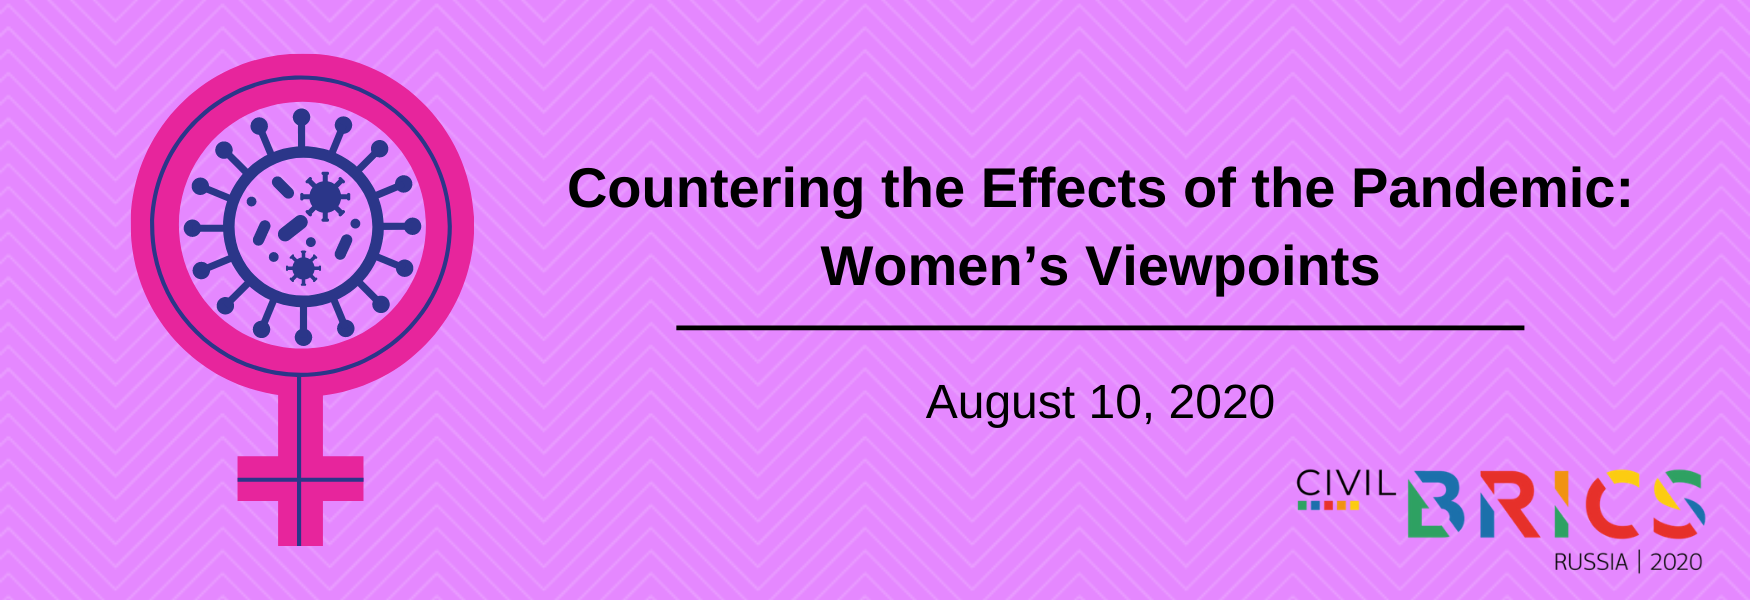 Countering the Effects of the Pandemic: Women's Viewpoints